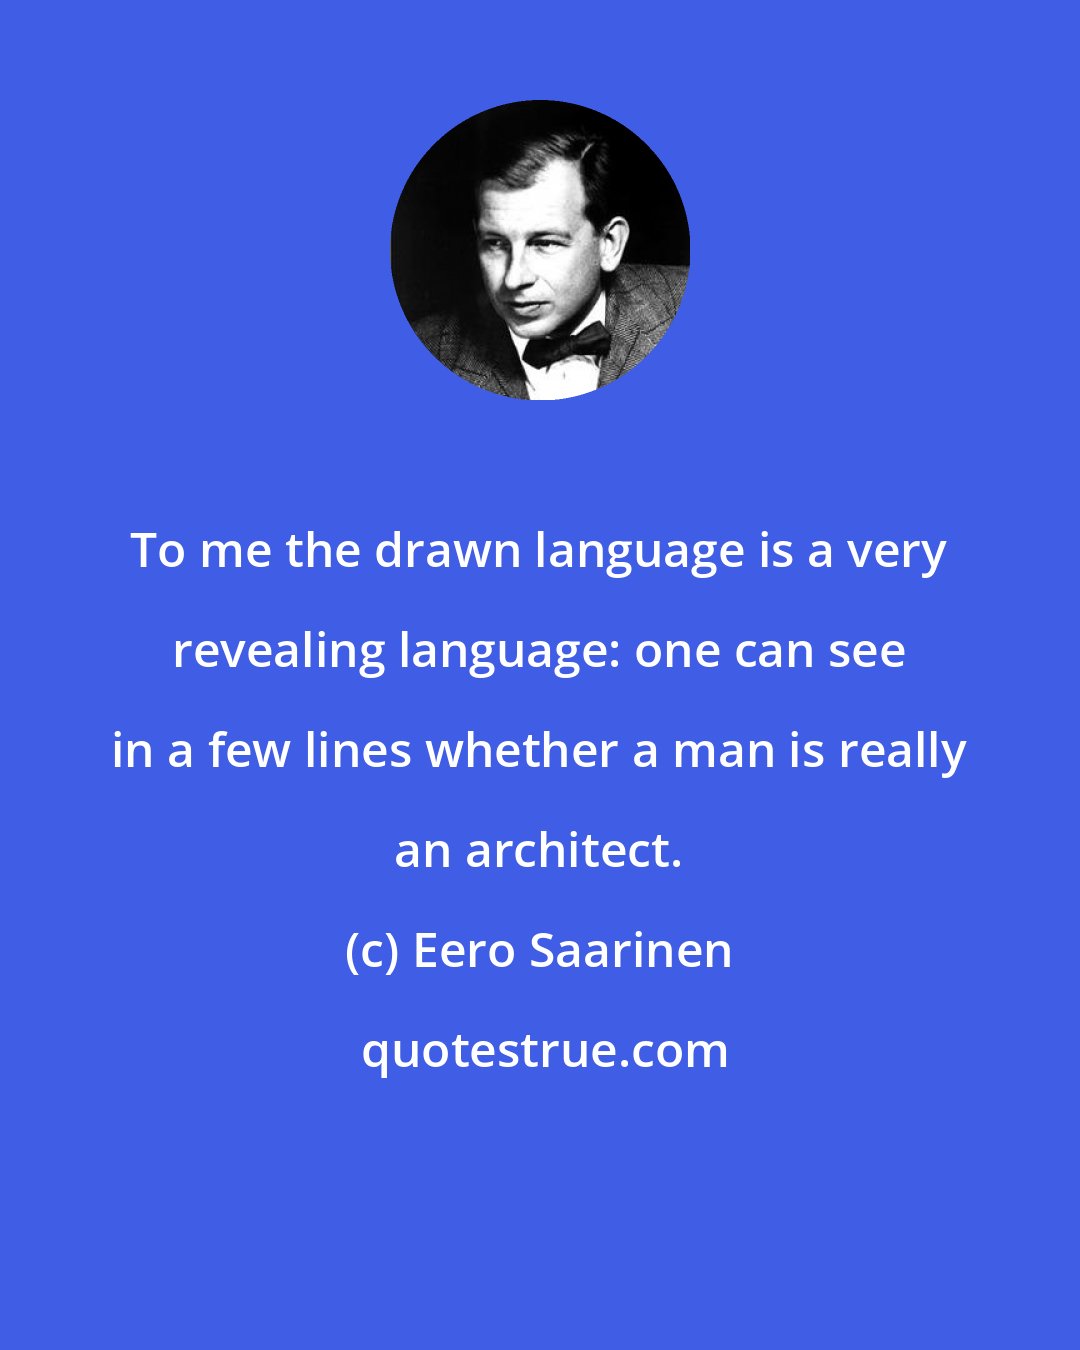 Eero Saarinen: To me the drawn language is a very revealing language: one can see in a few lines whether a man is really an architect.